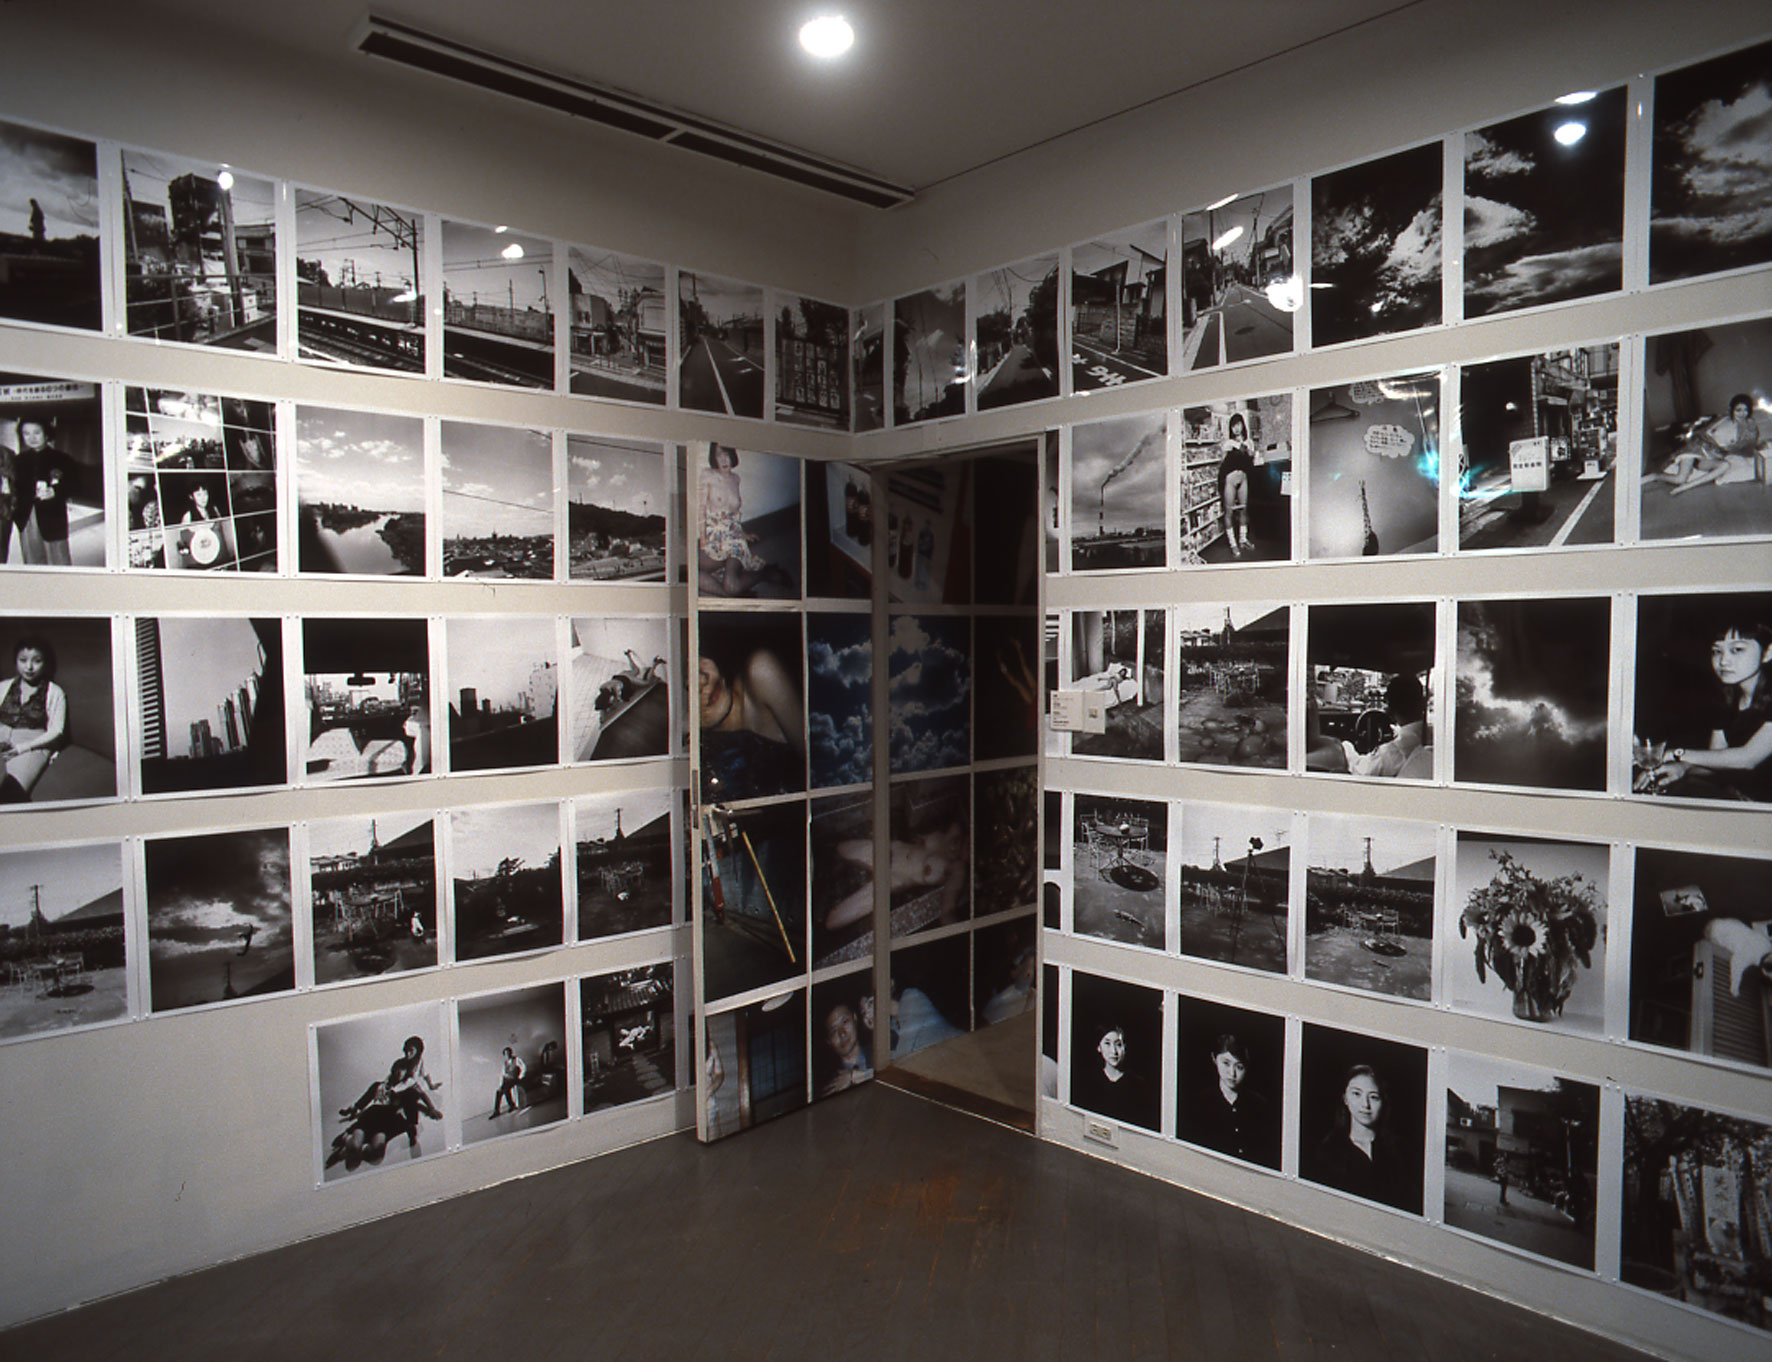 Photograph of one corner of a room, the walls and door tiled with photographs